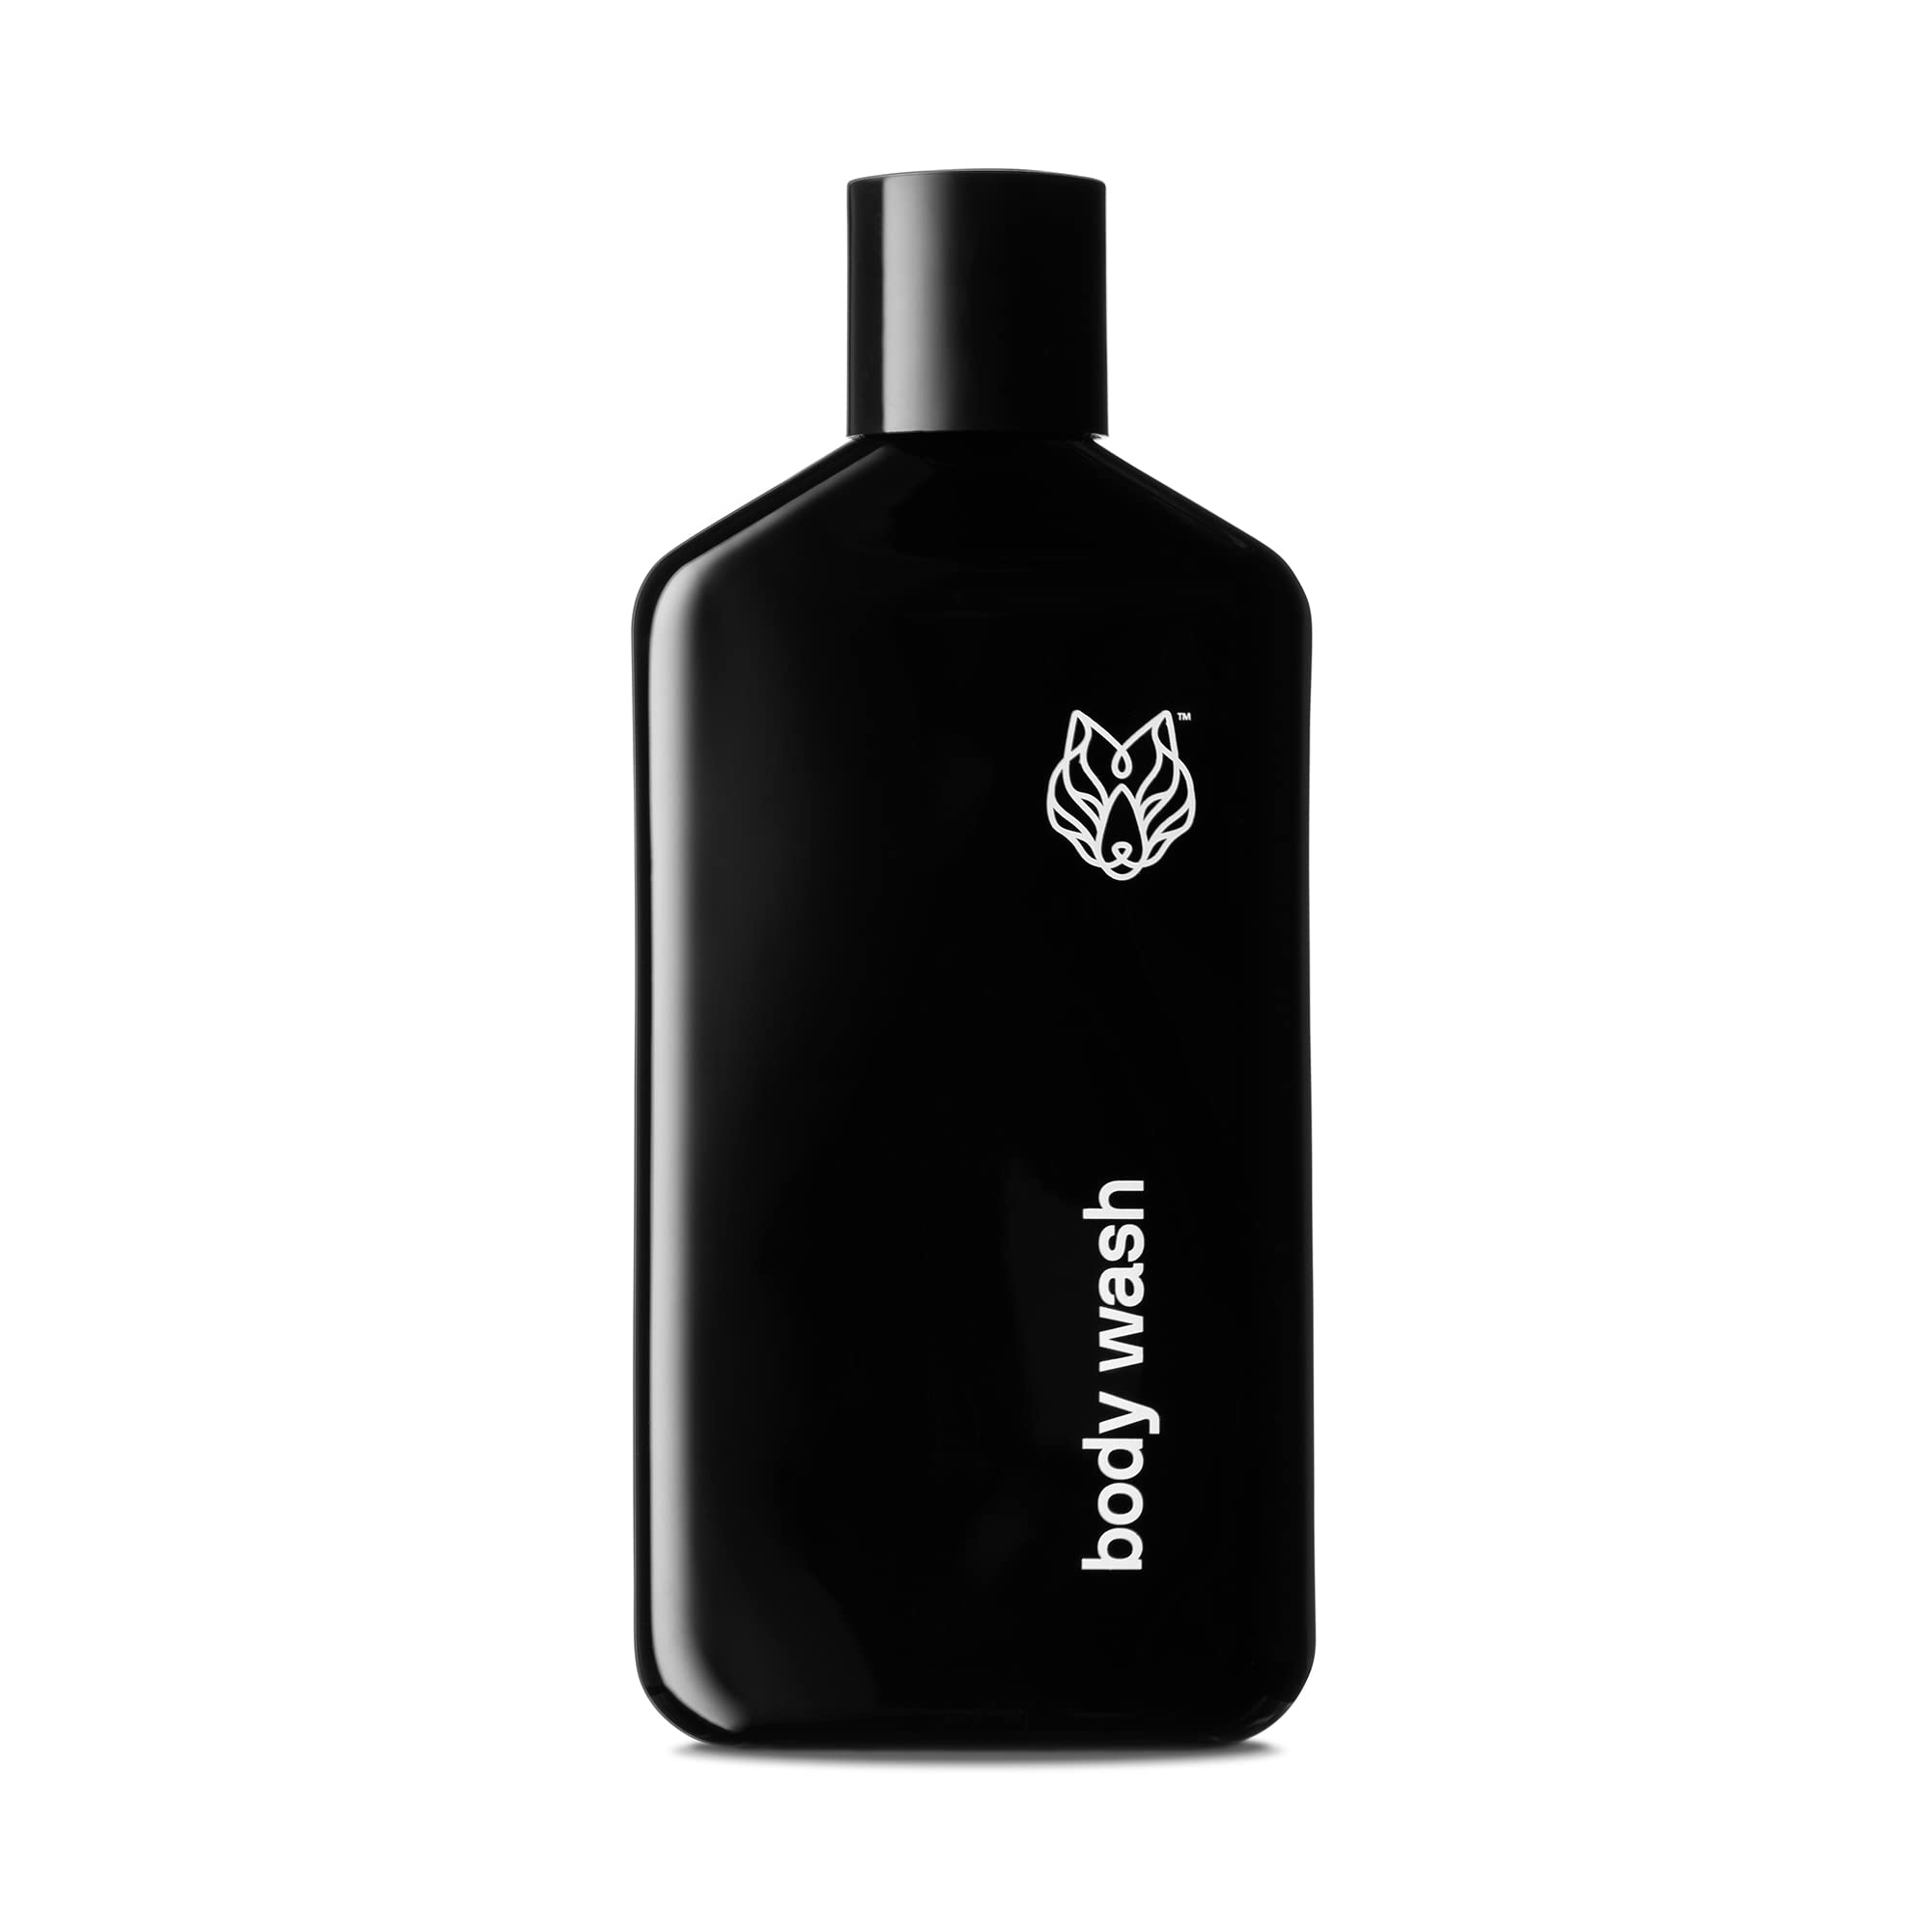 Black Wolf Charcoal Powder Body Wash for Men- 10 Fl Oz- Charcoal Powder and Salicylic Acid Reduce Acne Breakouts and Cleanse Your Skin- Rich Lather for Full Coverage & Deep Clean - Paraben-Free